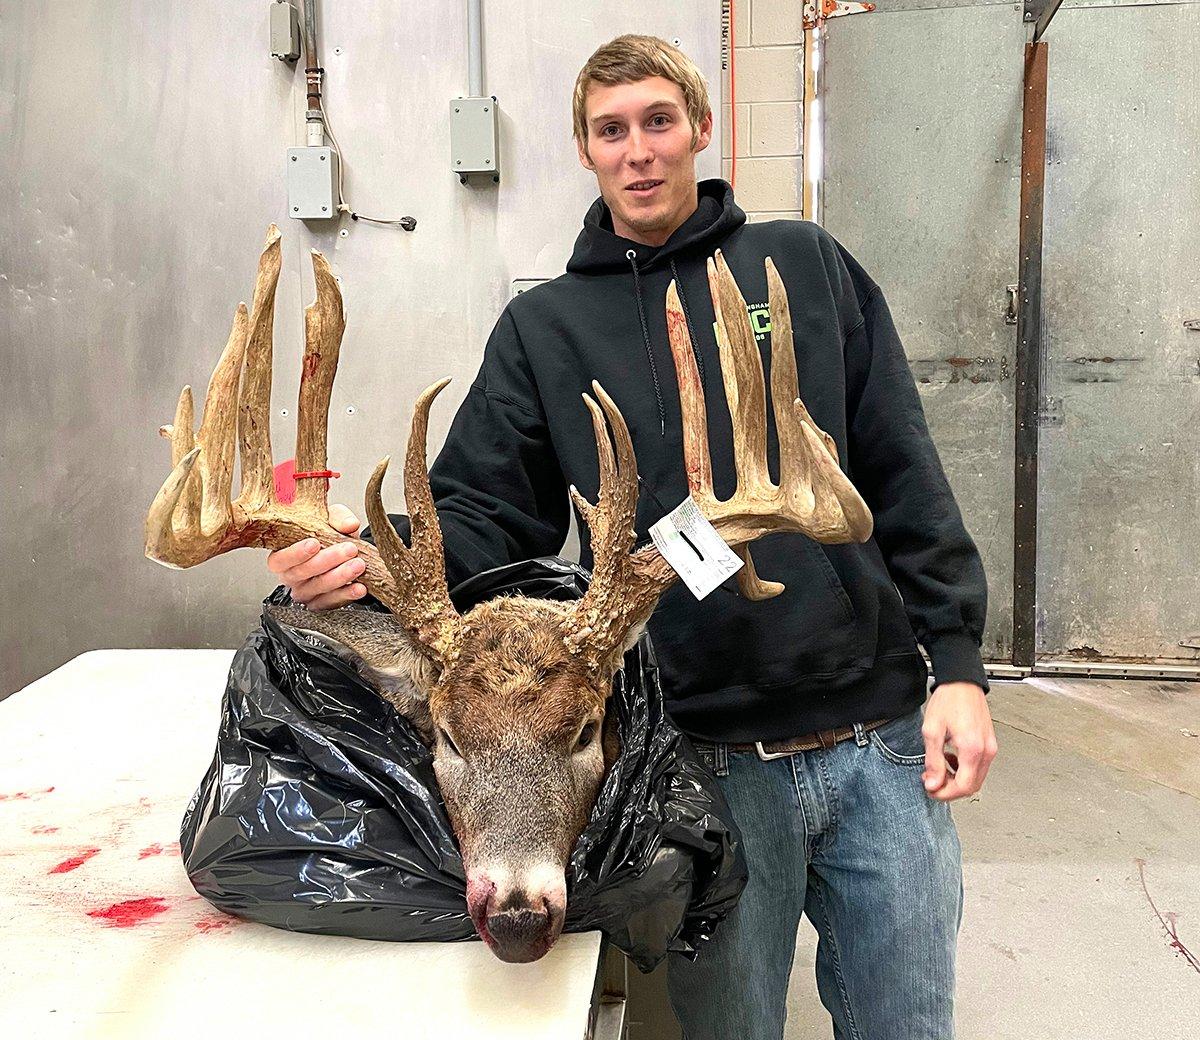 Mcallister took his buck to Korte Meat Processing, which shared the first photos on social media.